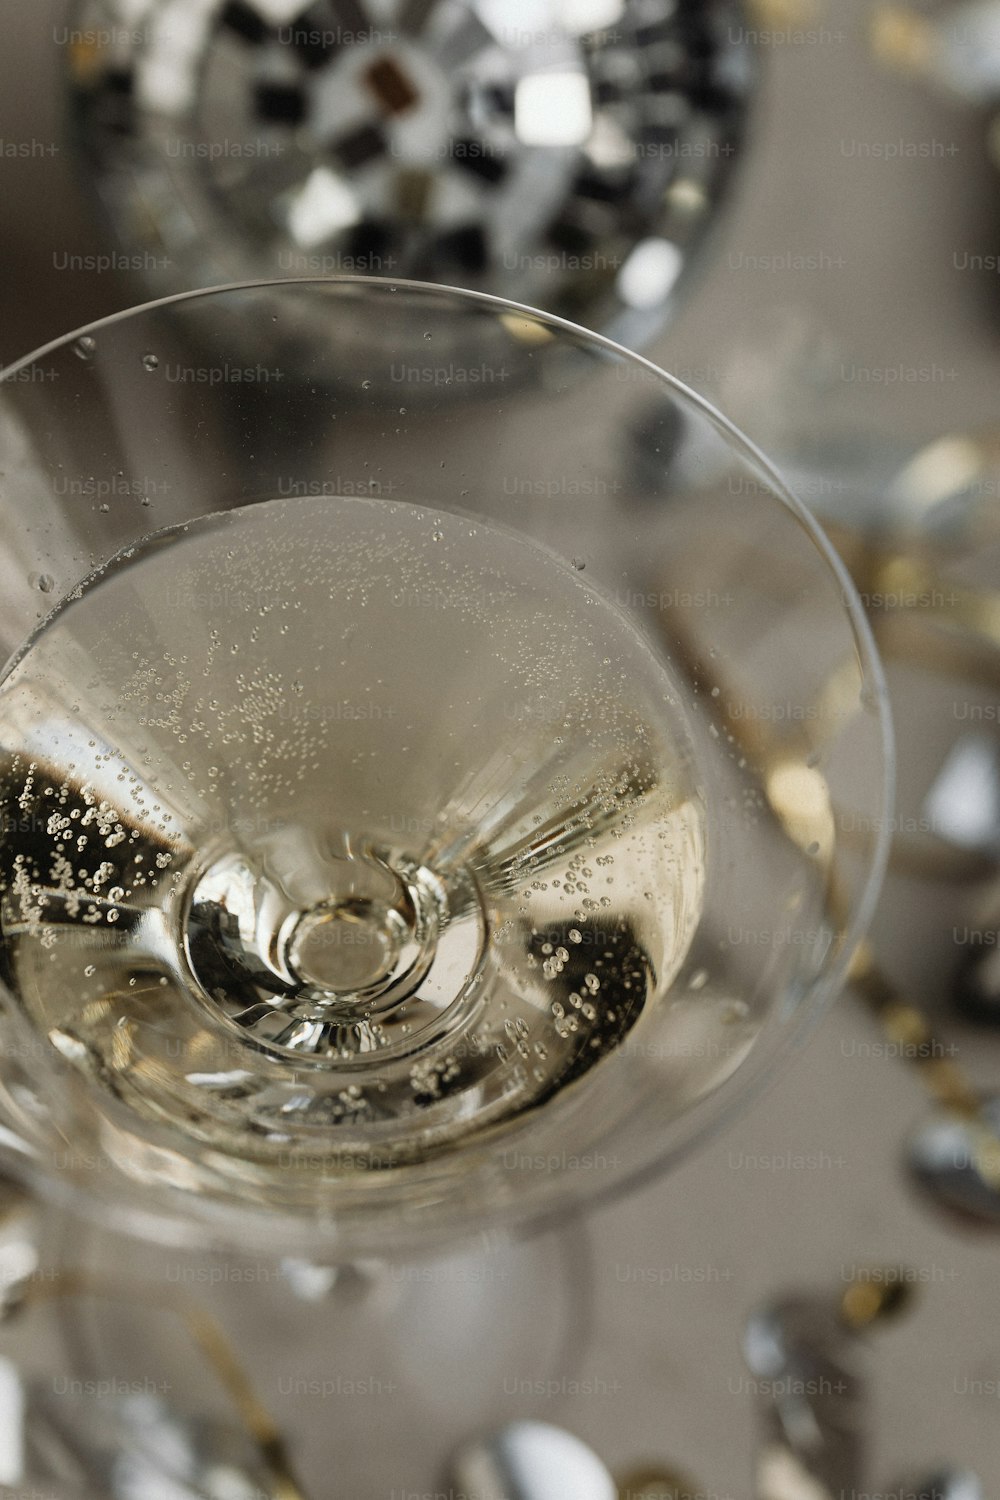 a close up of a wine glass on a table